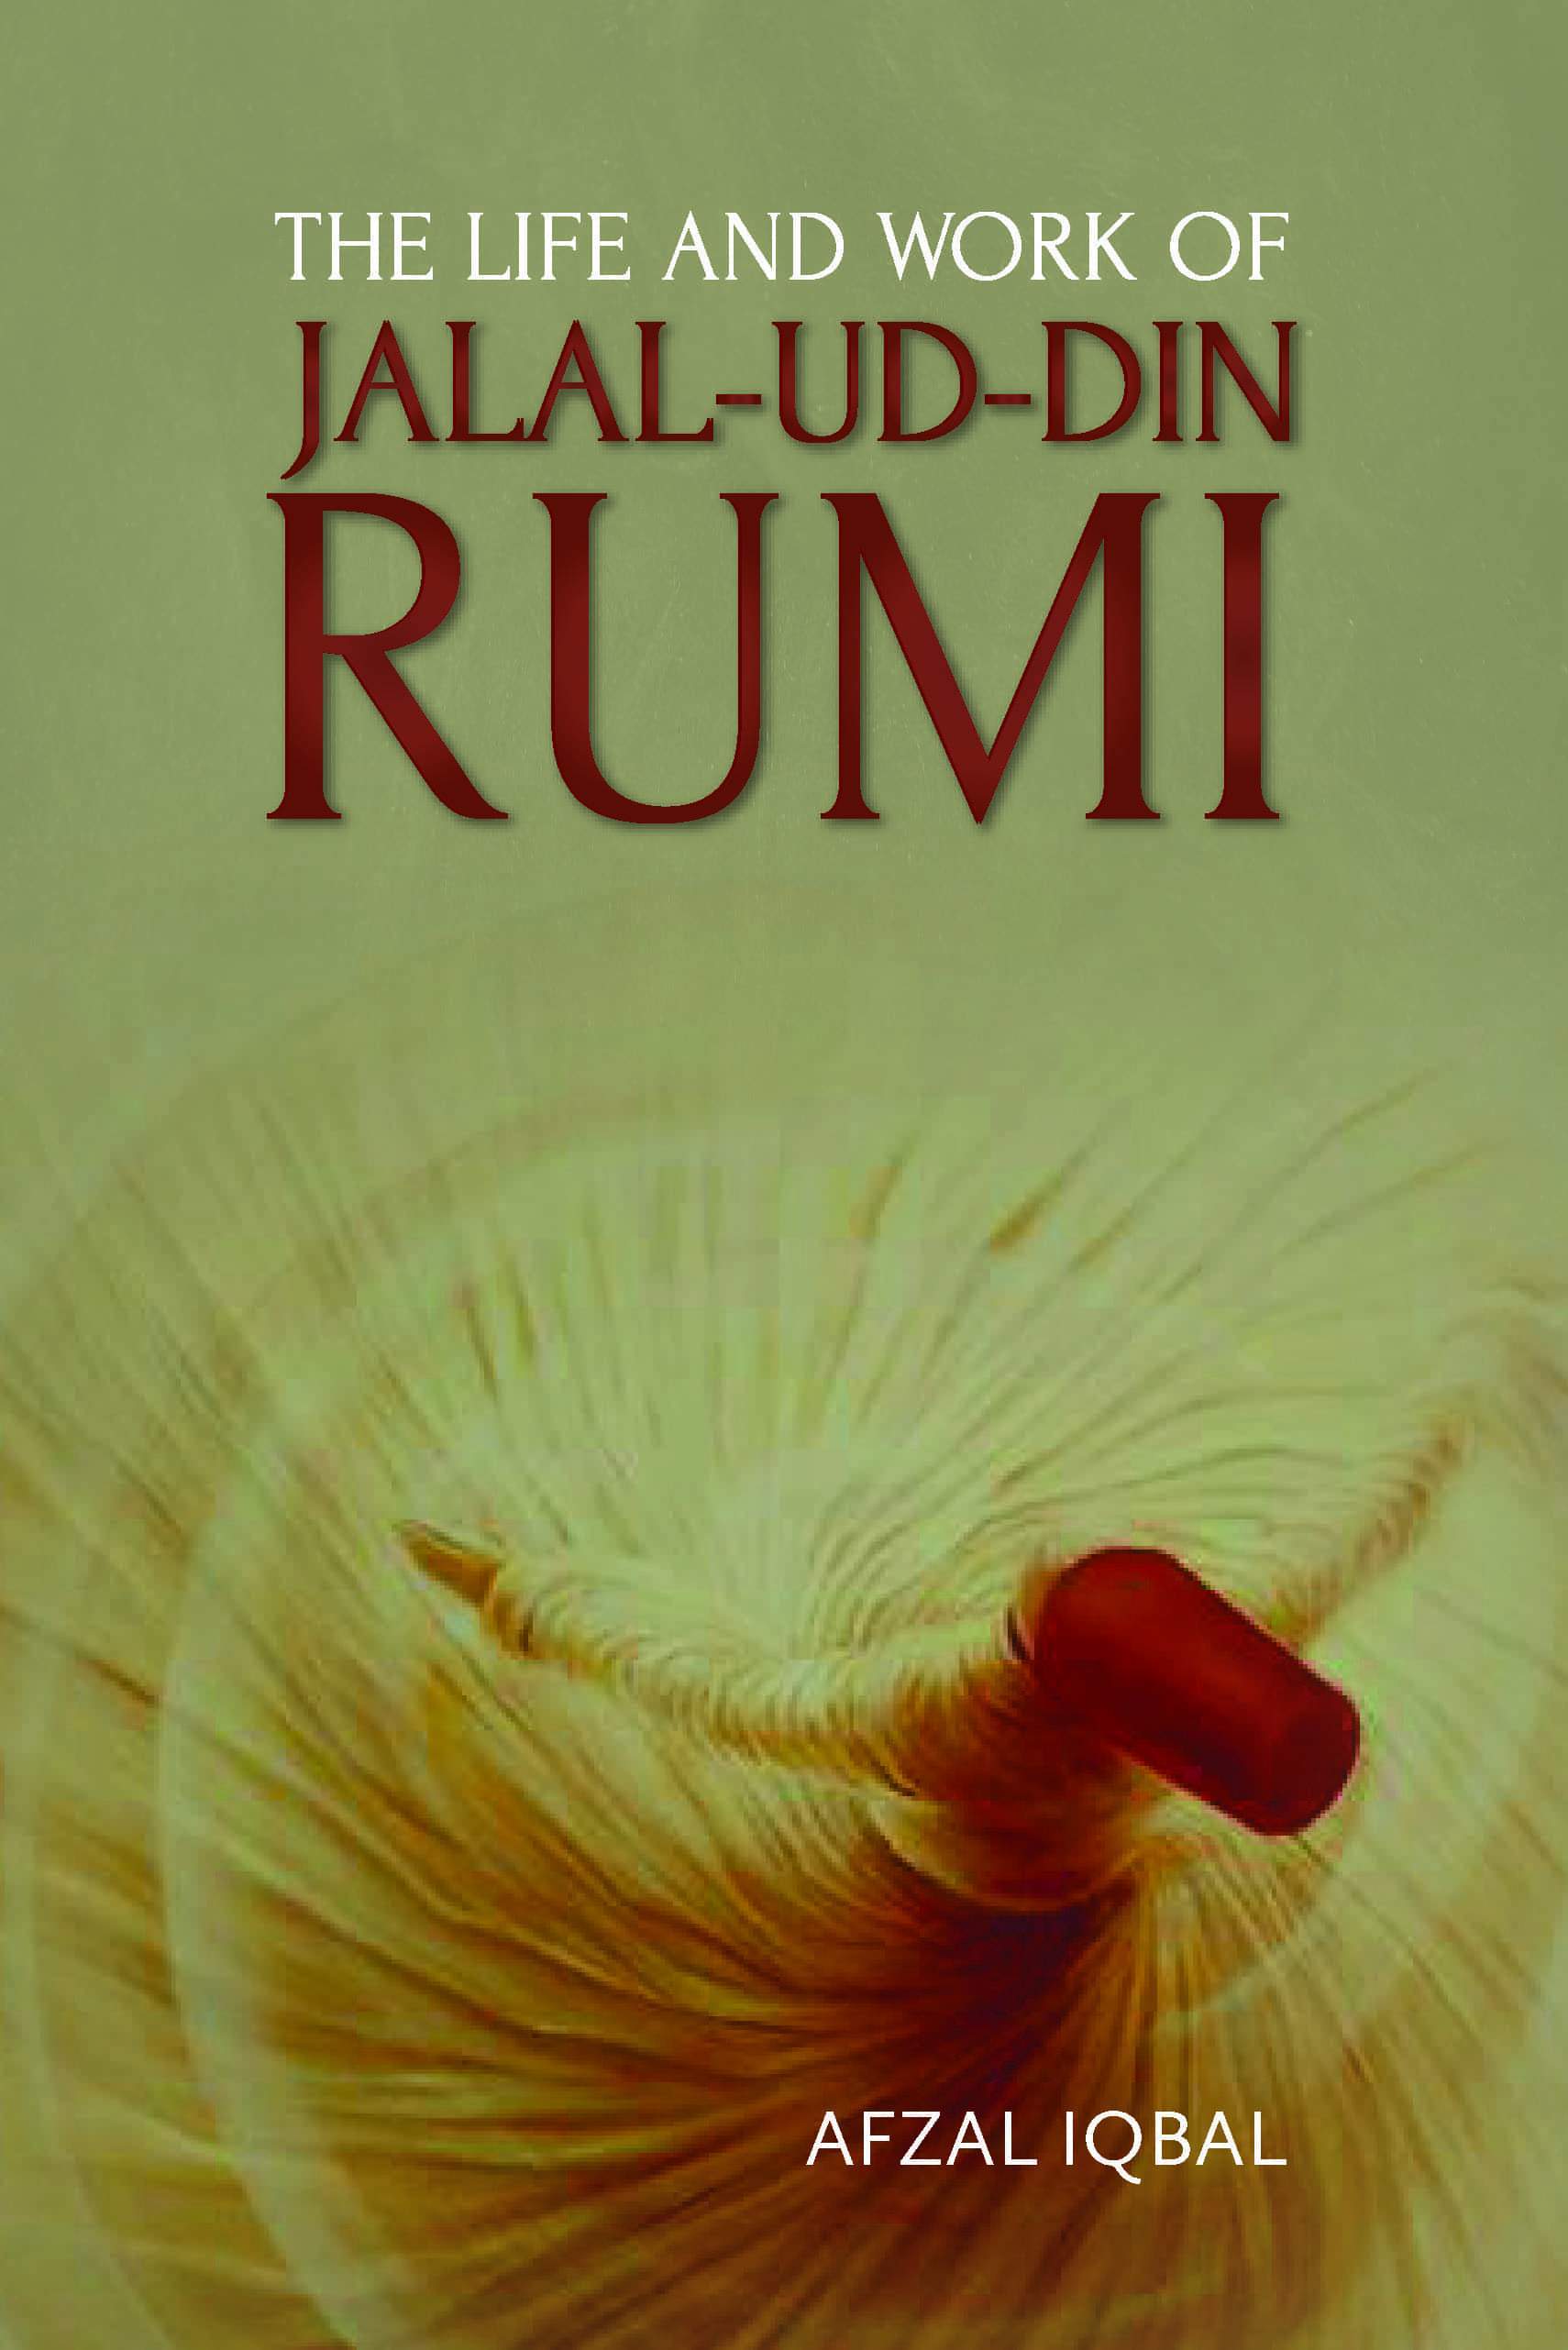 The Life and Work of Jalal-ud-din Rumi - Iman Shoppe Bookstore